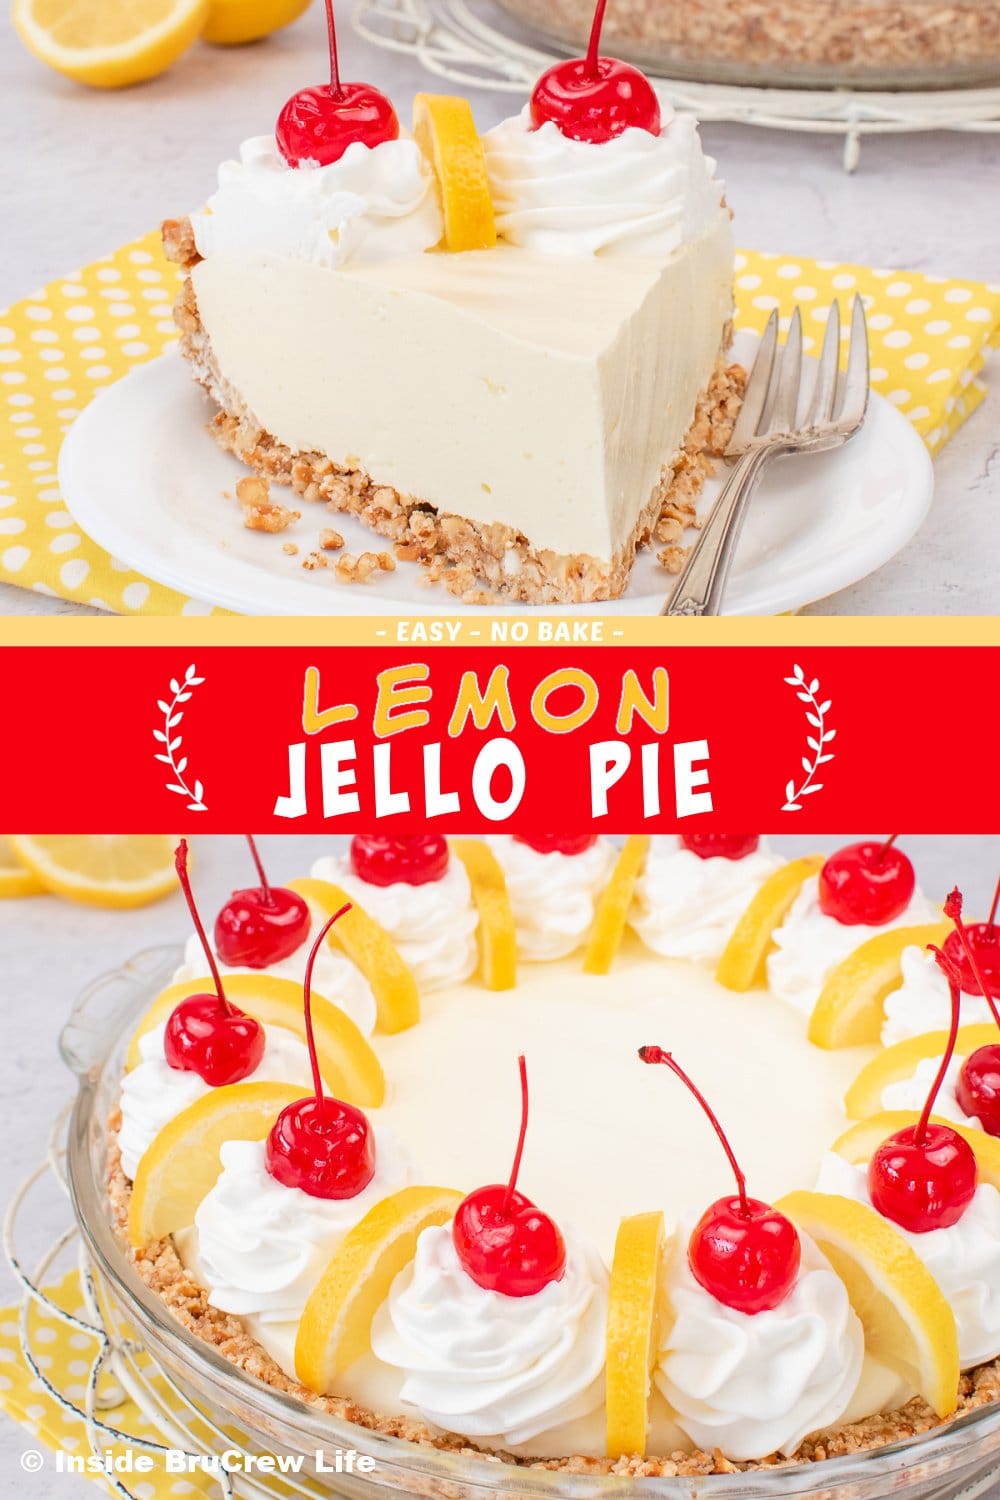 Two pictures of a Jello pie collaged together with a red text box.